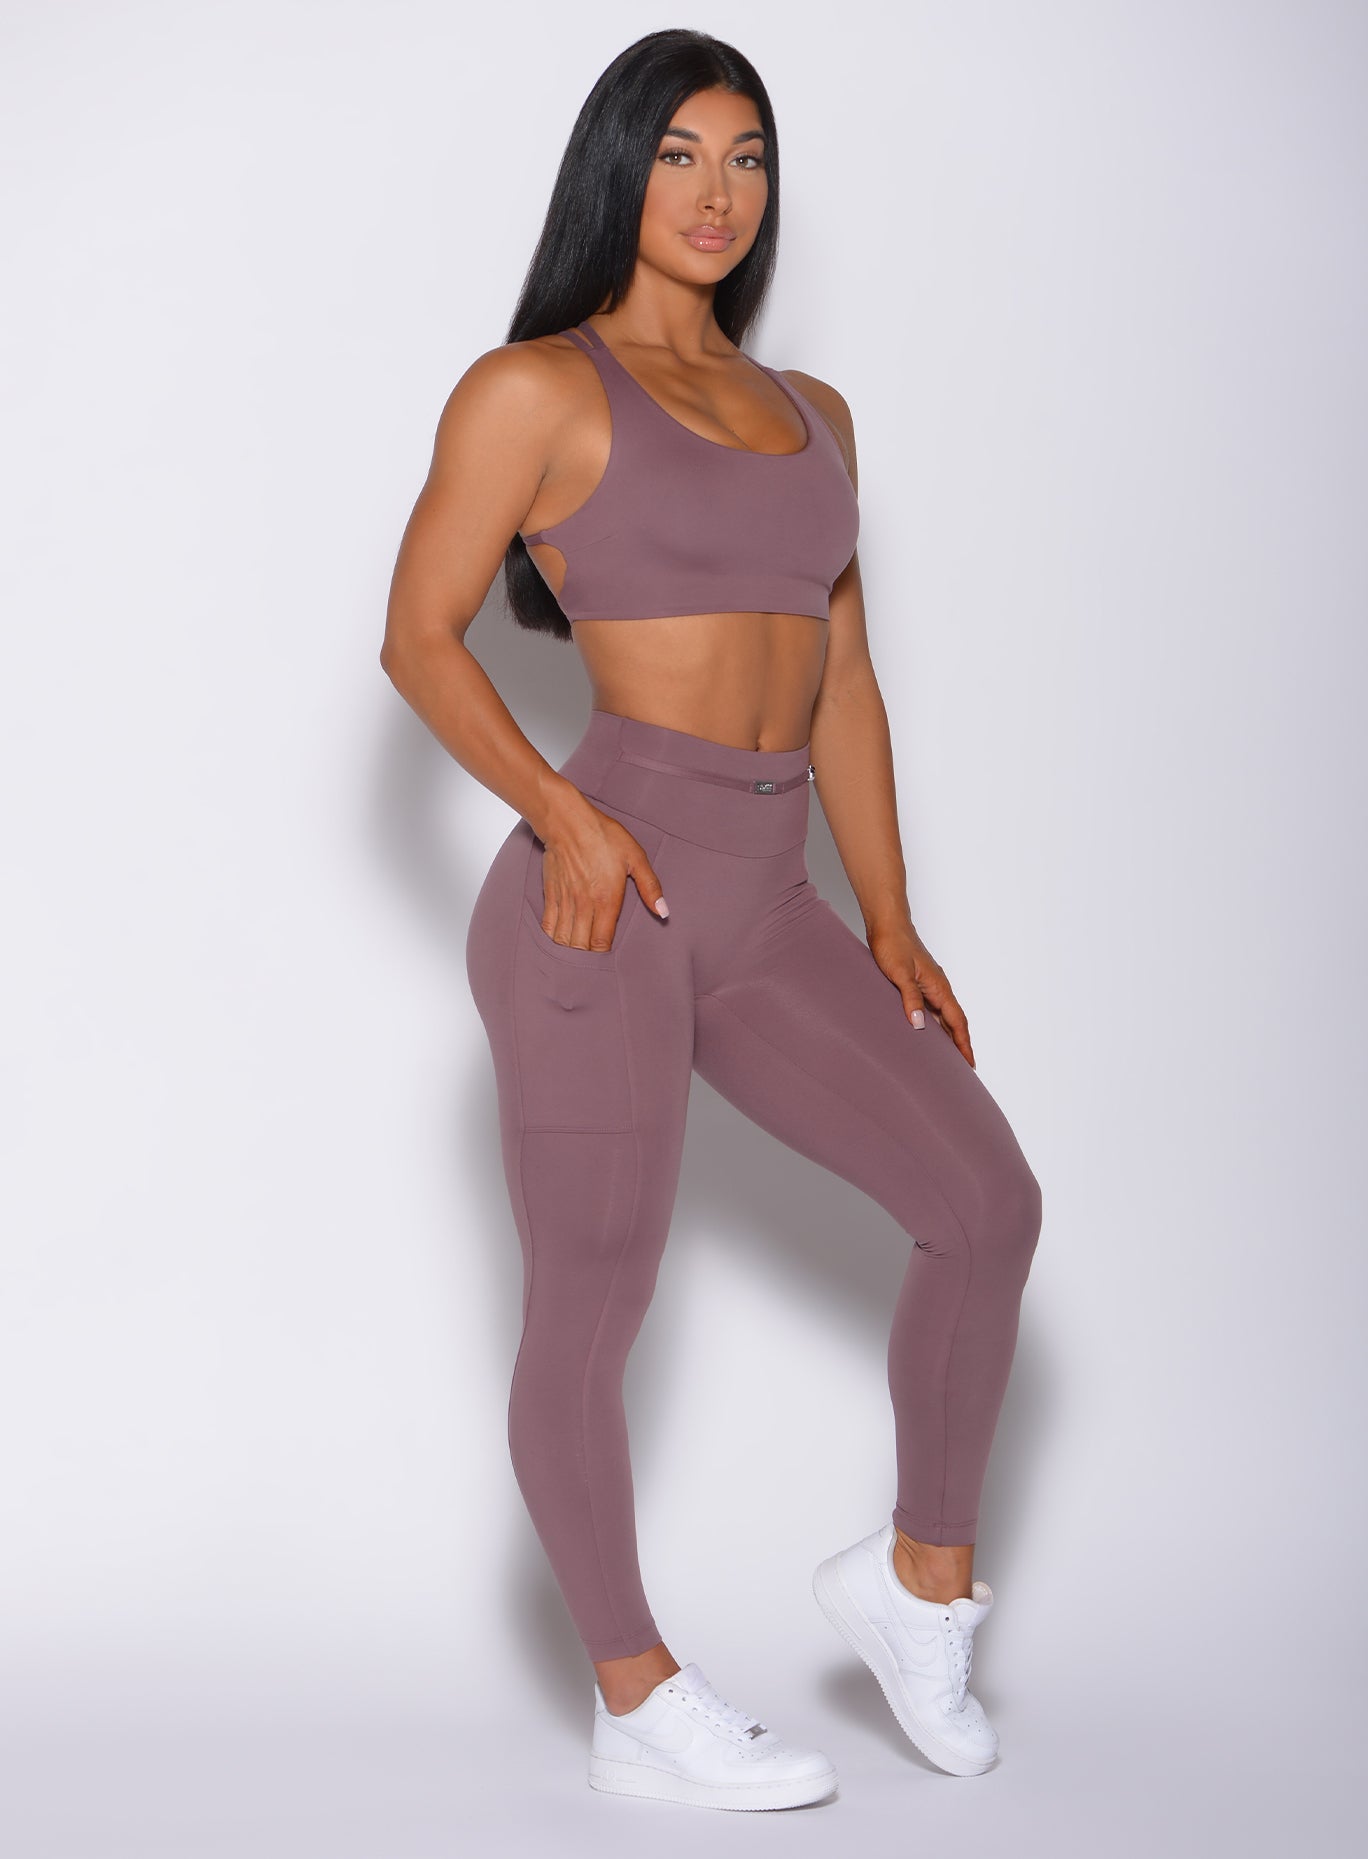 Right side profile view of a model angled right wearing our barbell legging in mauve color and a matching bra